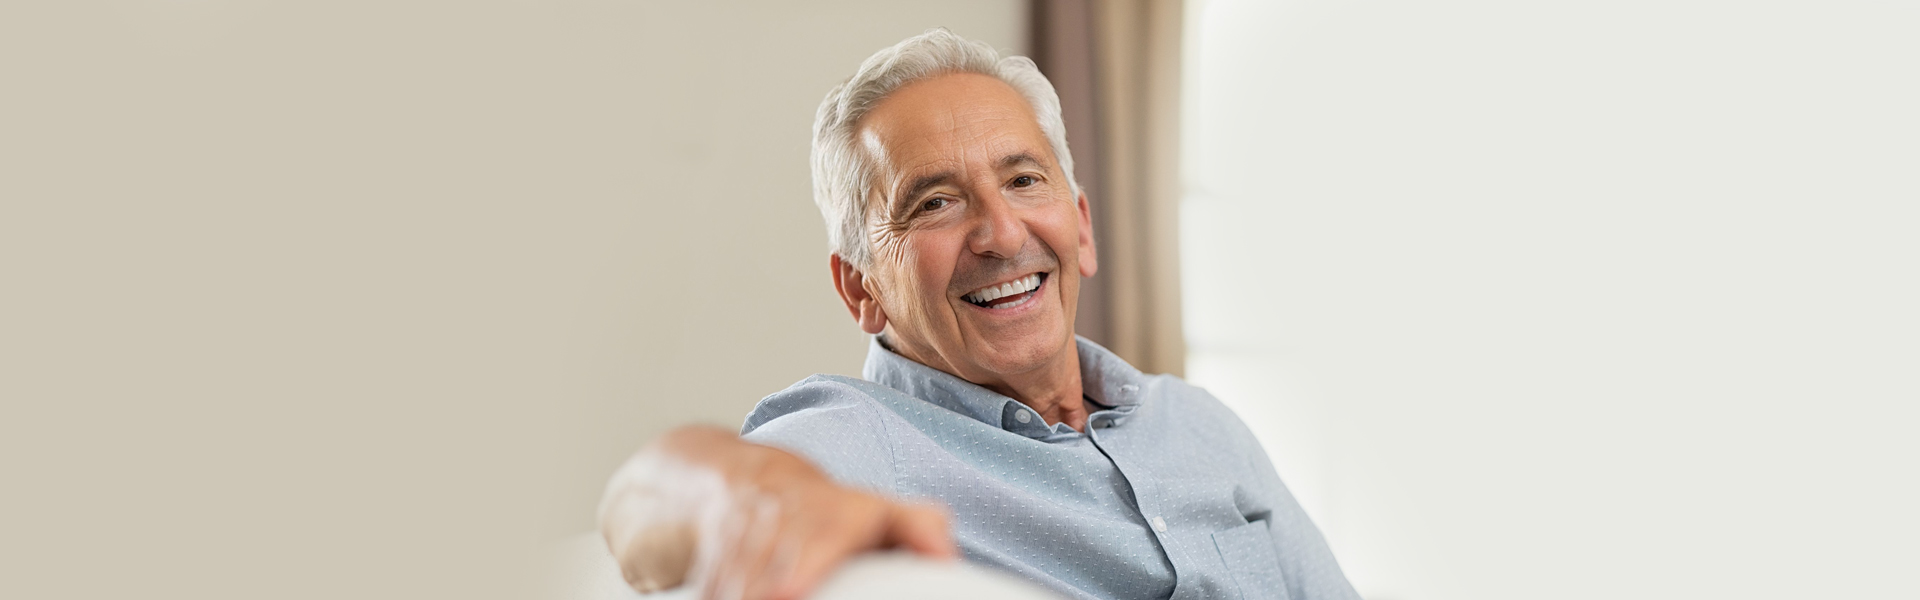 The Dental Implant Surgery Healing Timeline